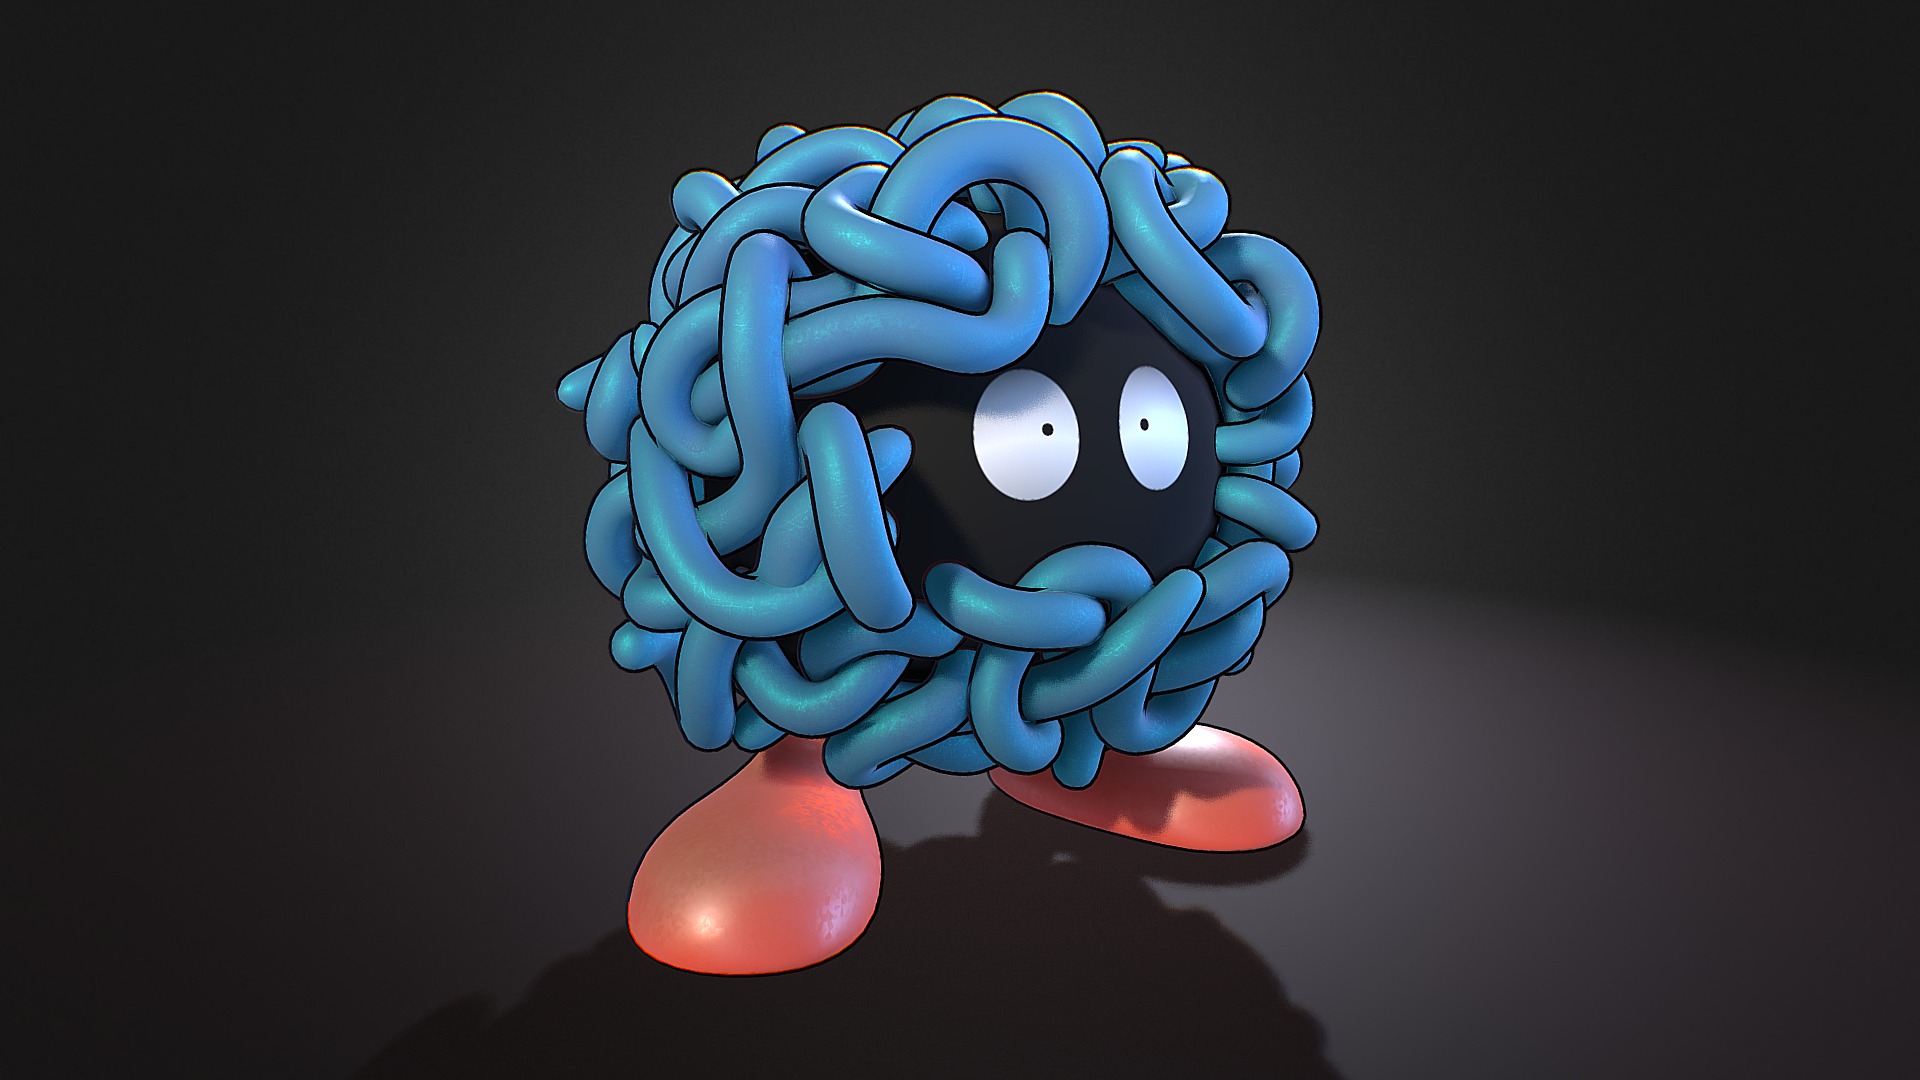 3D model Tangela Pokemon - This is a 3D model of the Tangela Pokemon. The 3D model is about a blue and red toy.